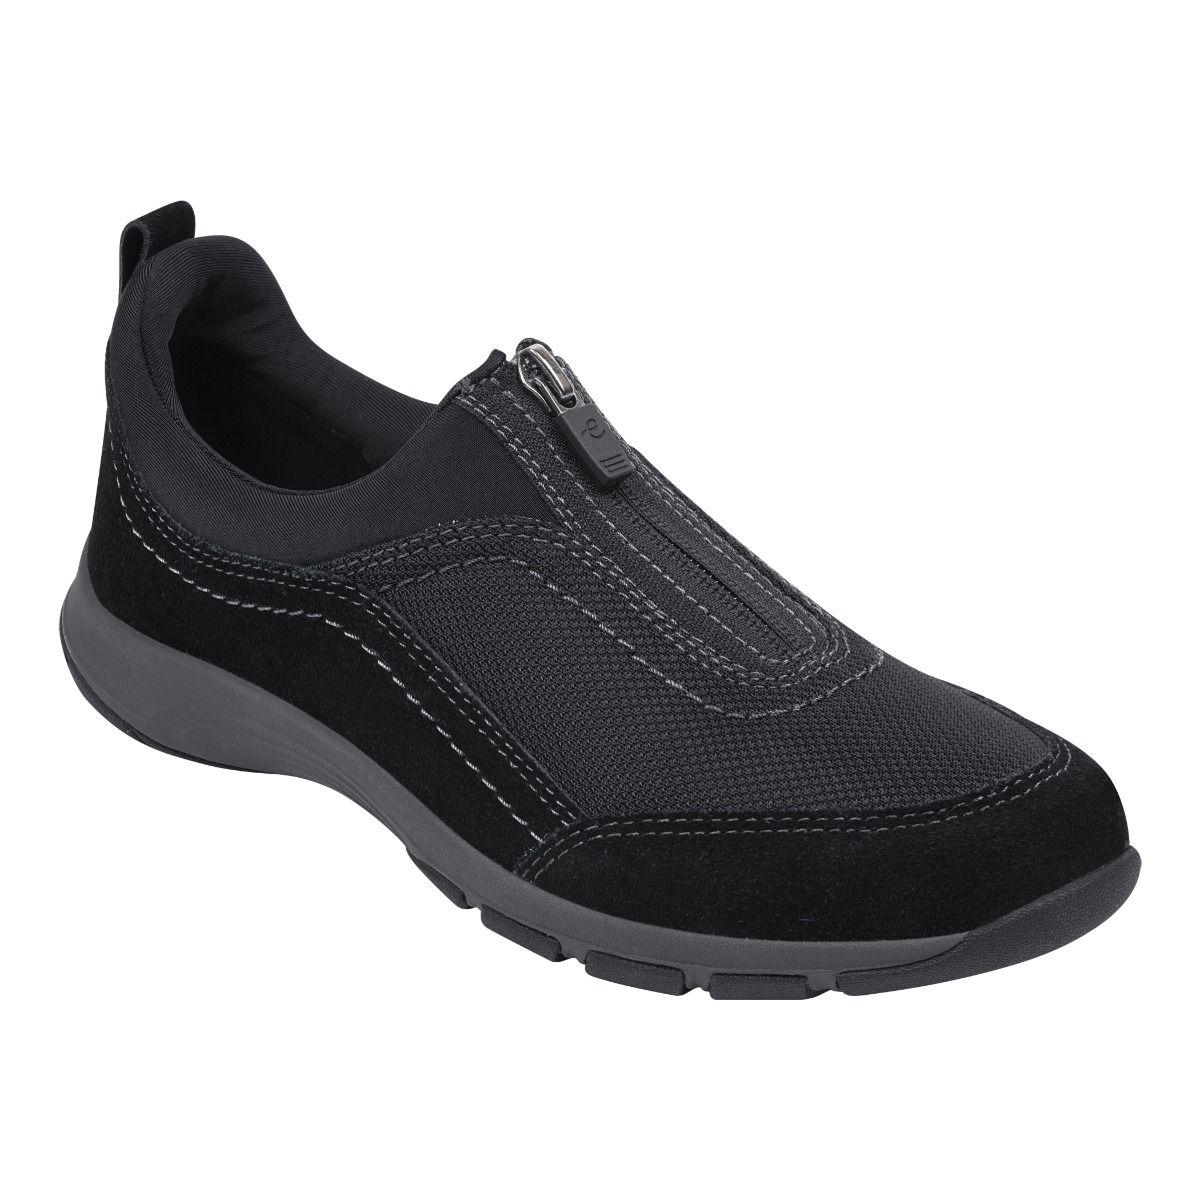 Easy Spirit Rubber Cave Walking Shoes in Black Suede (Black) - Lyst